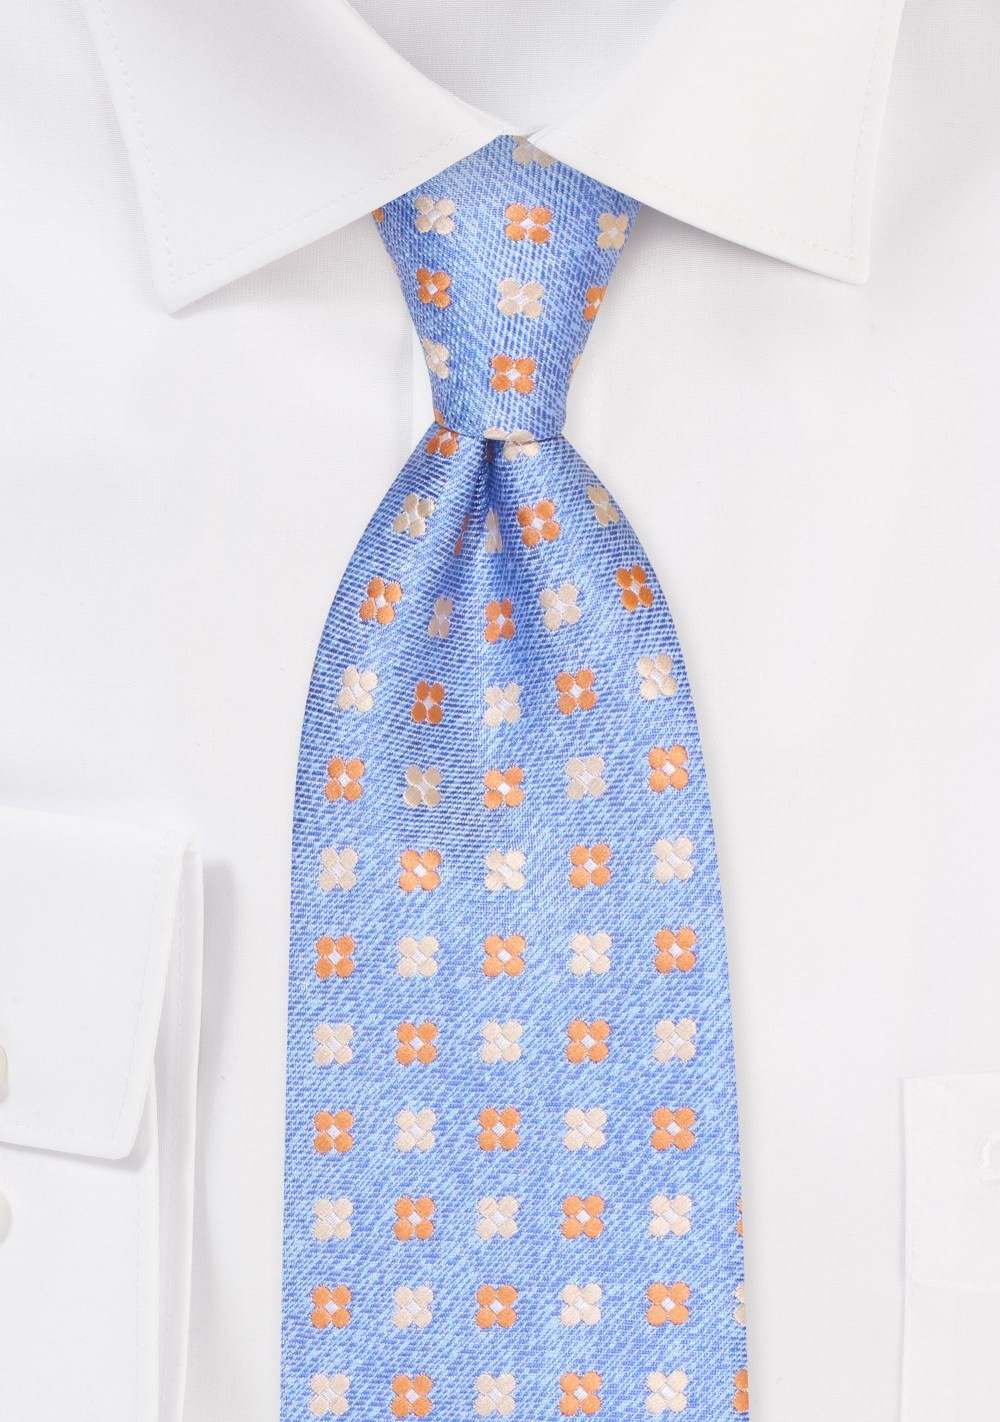 Light Blue Kids Tie with Orange and Yellow Florals